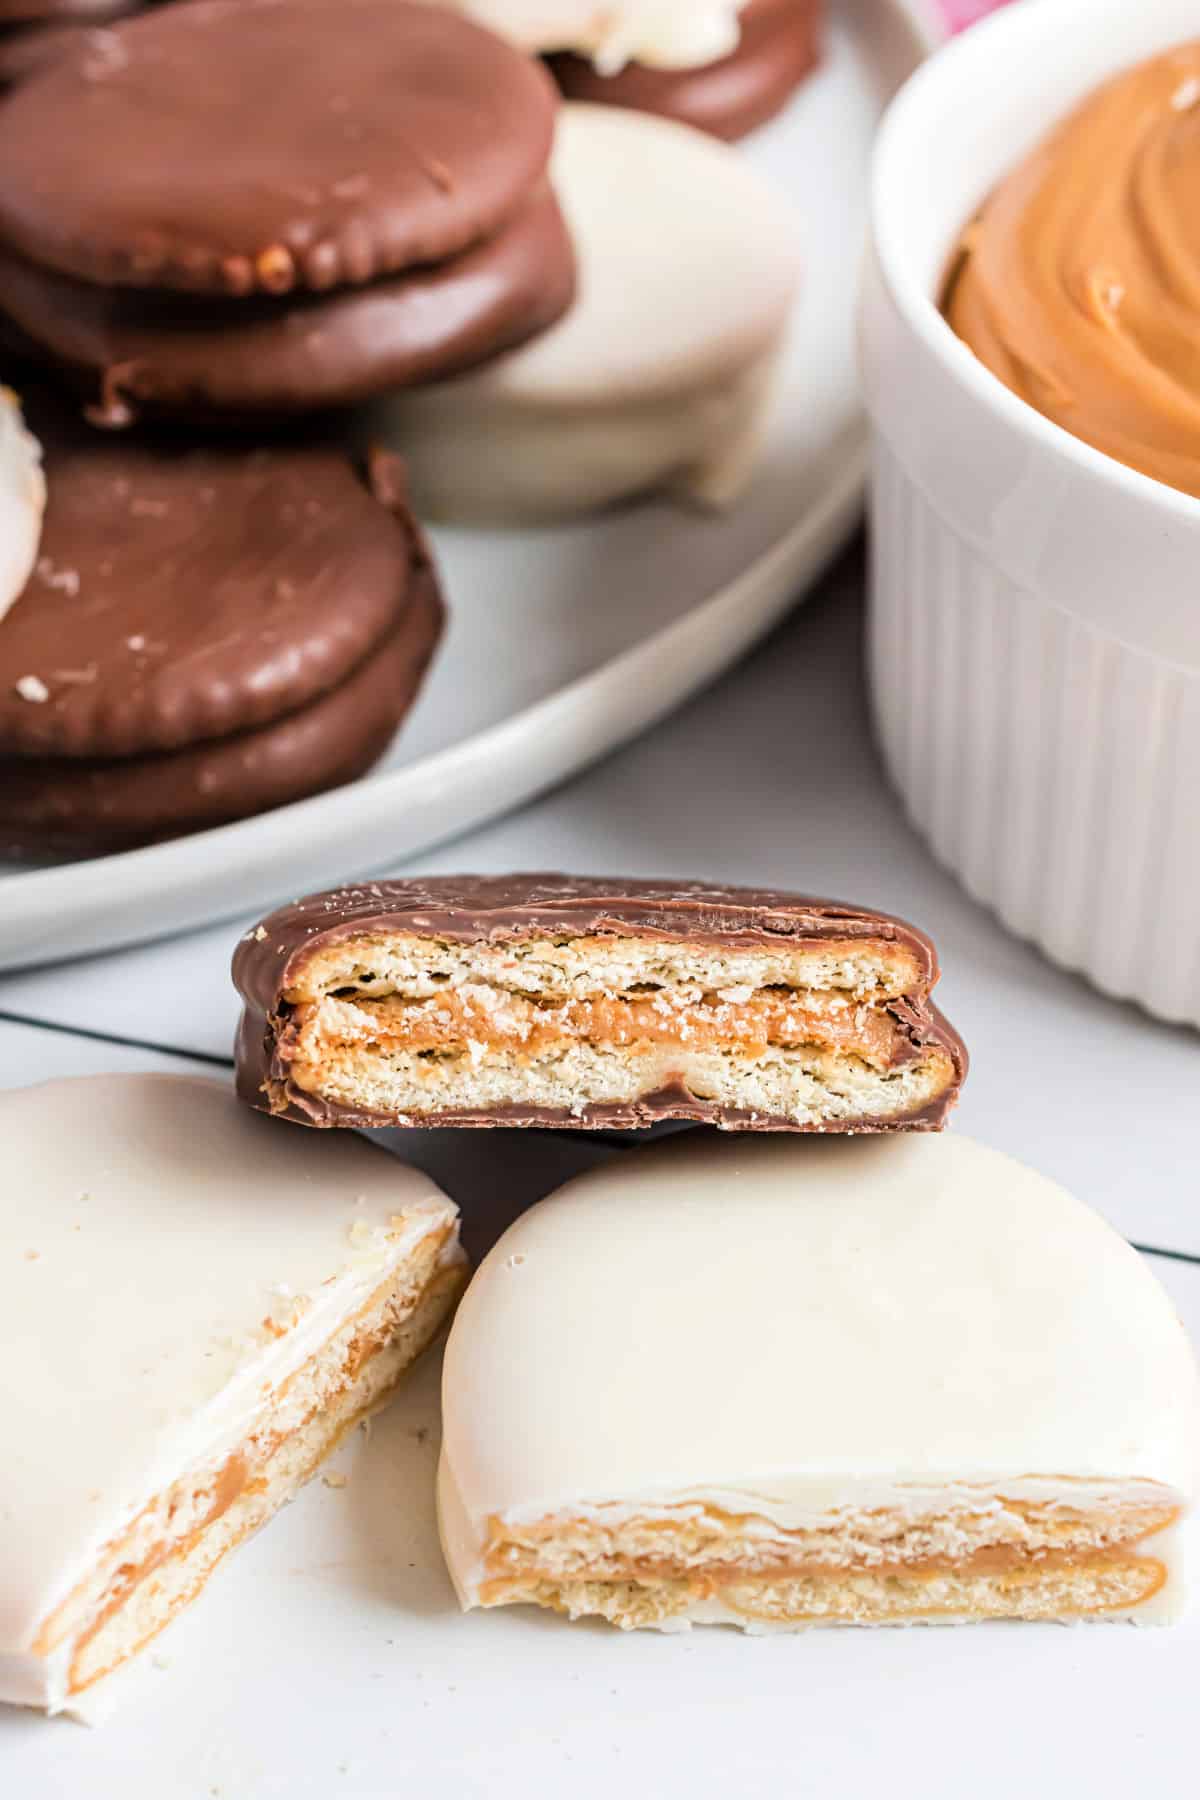 Ritz cookies with peanut butter filling.